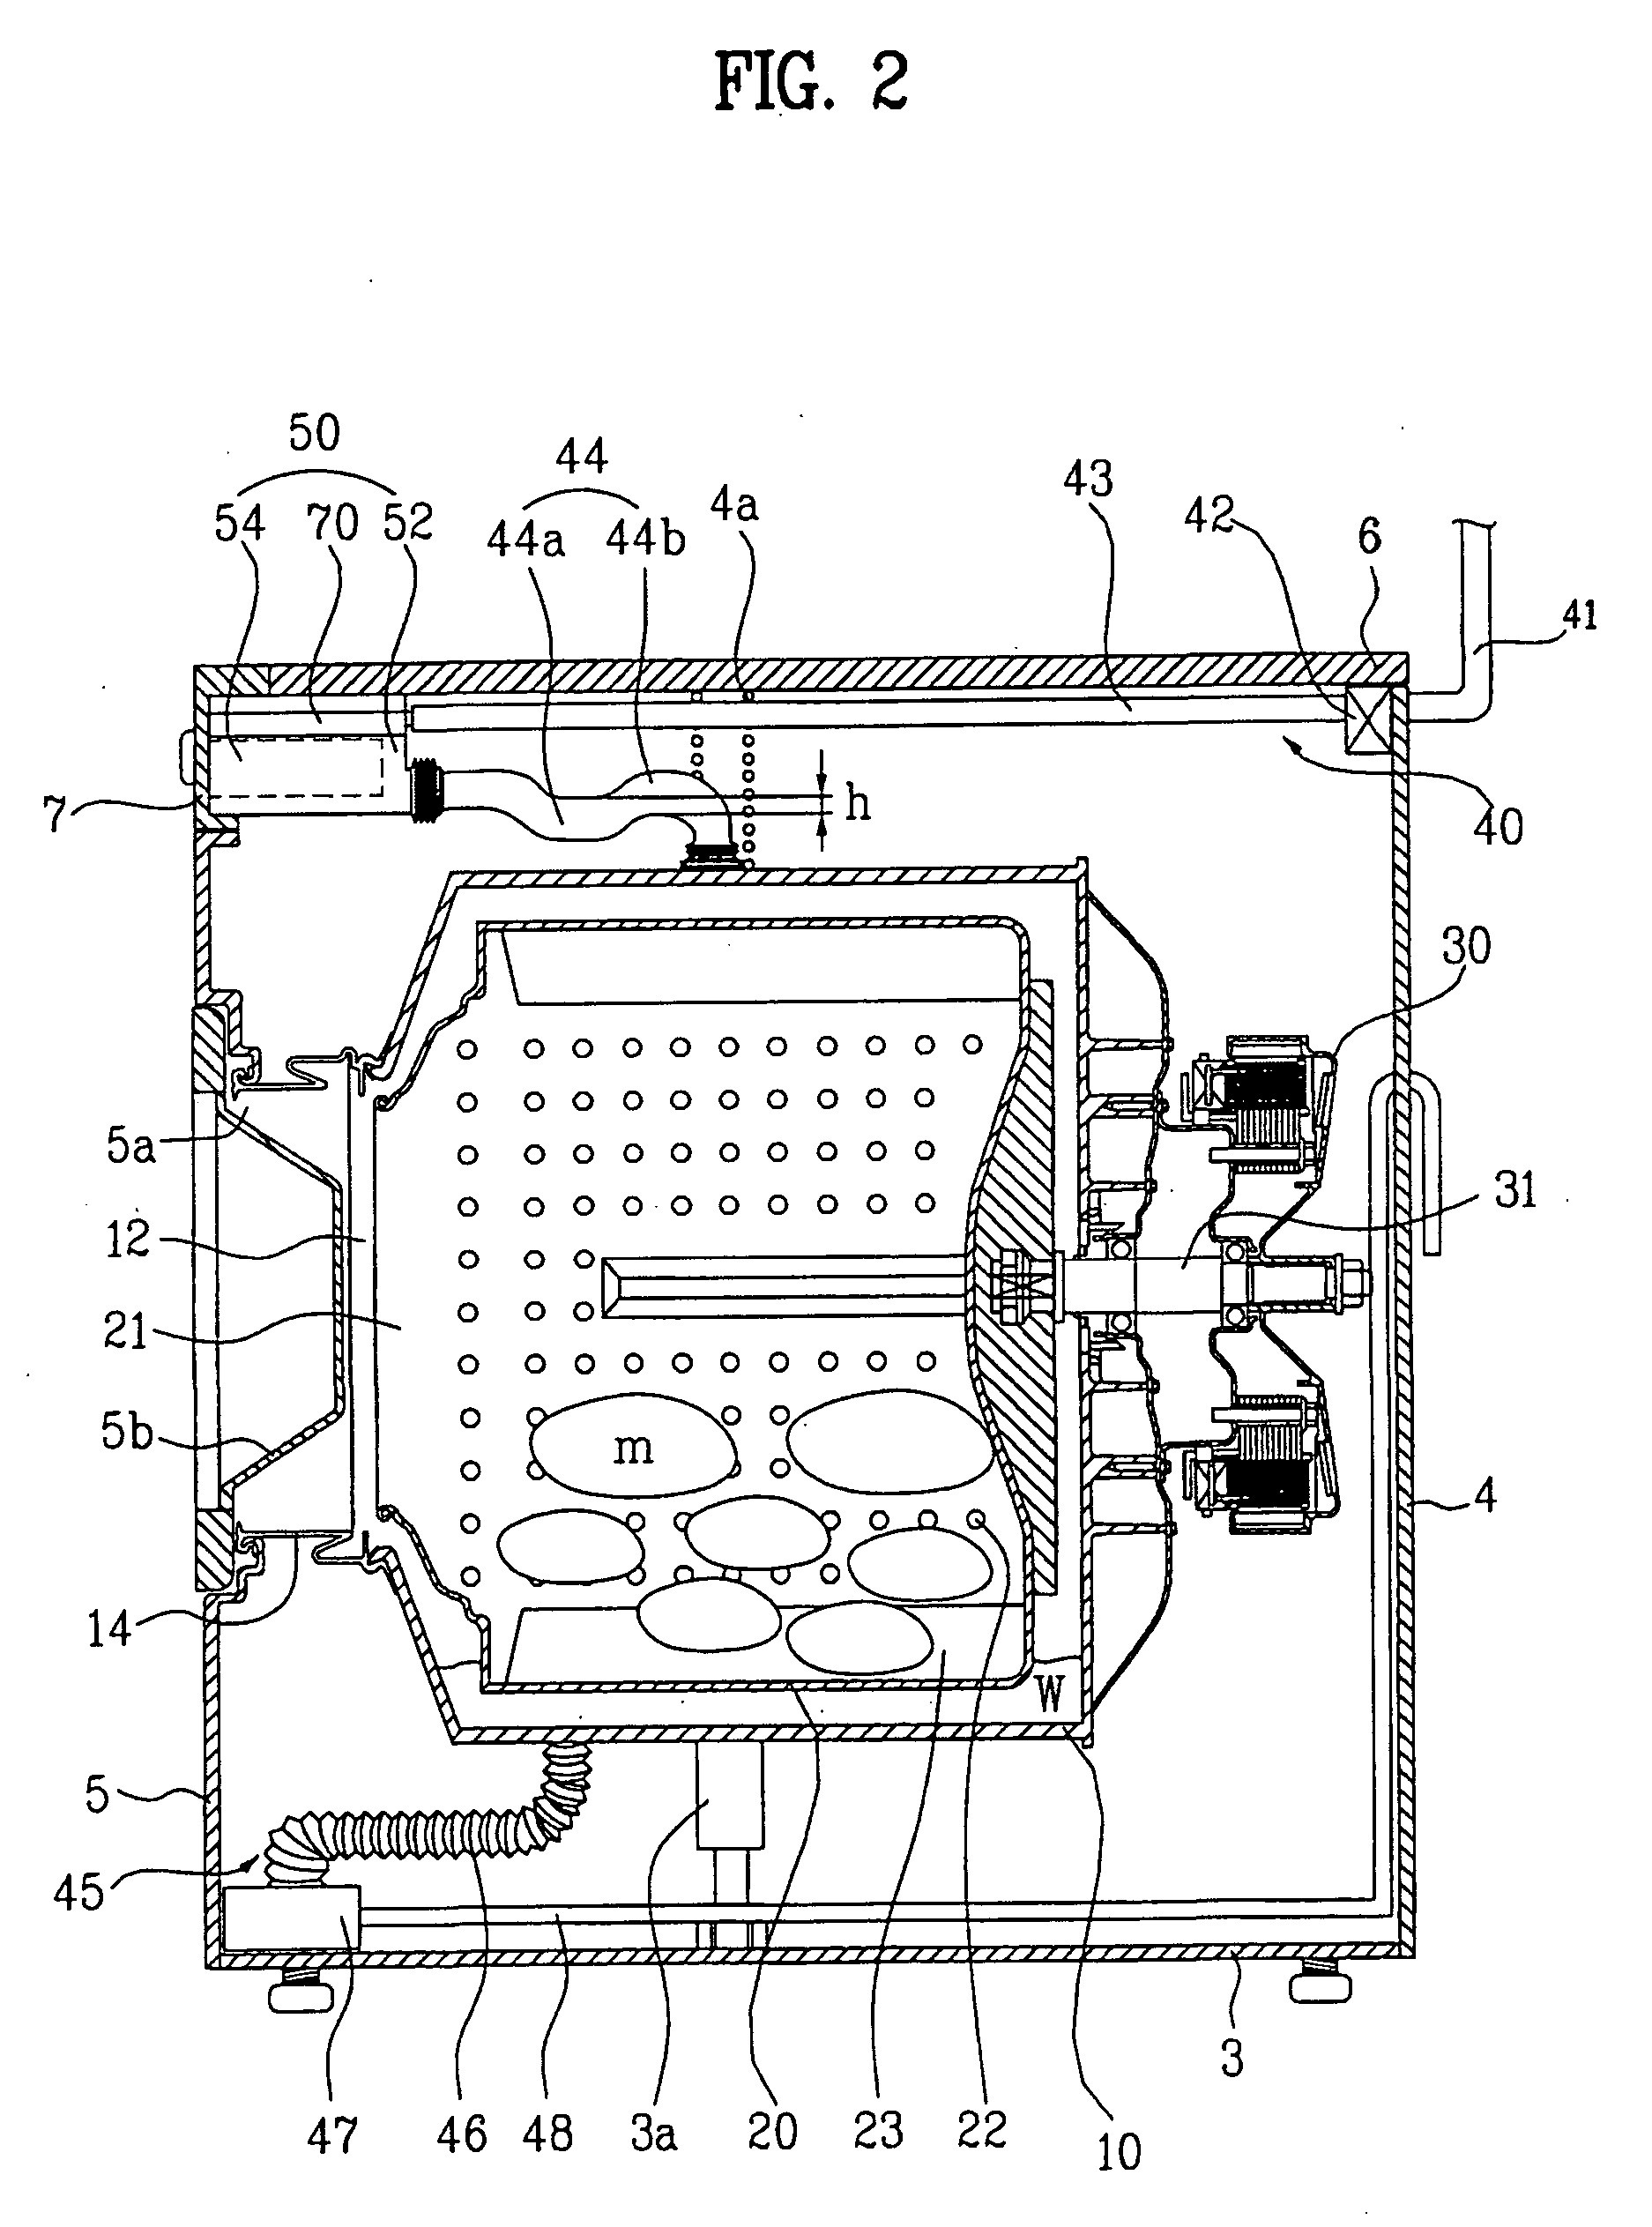 Apparatus for supplying detergent in washer